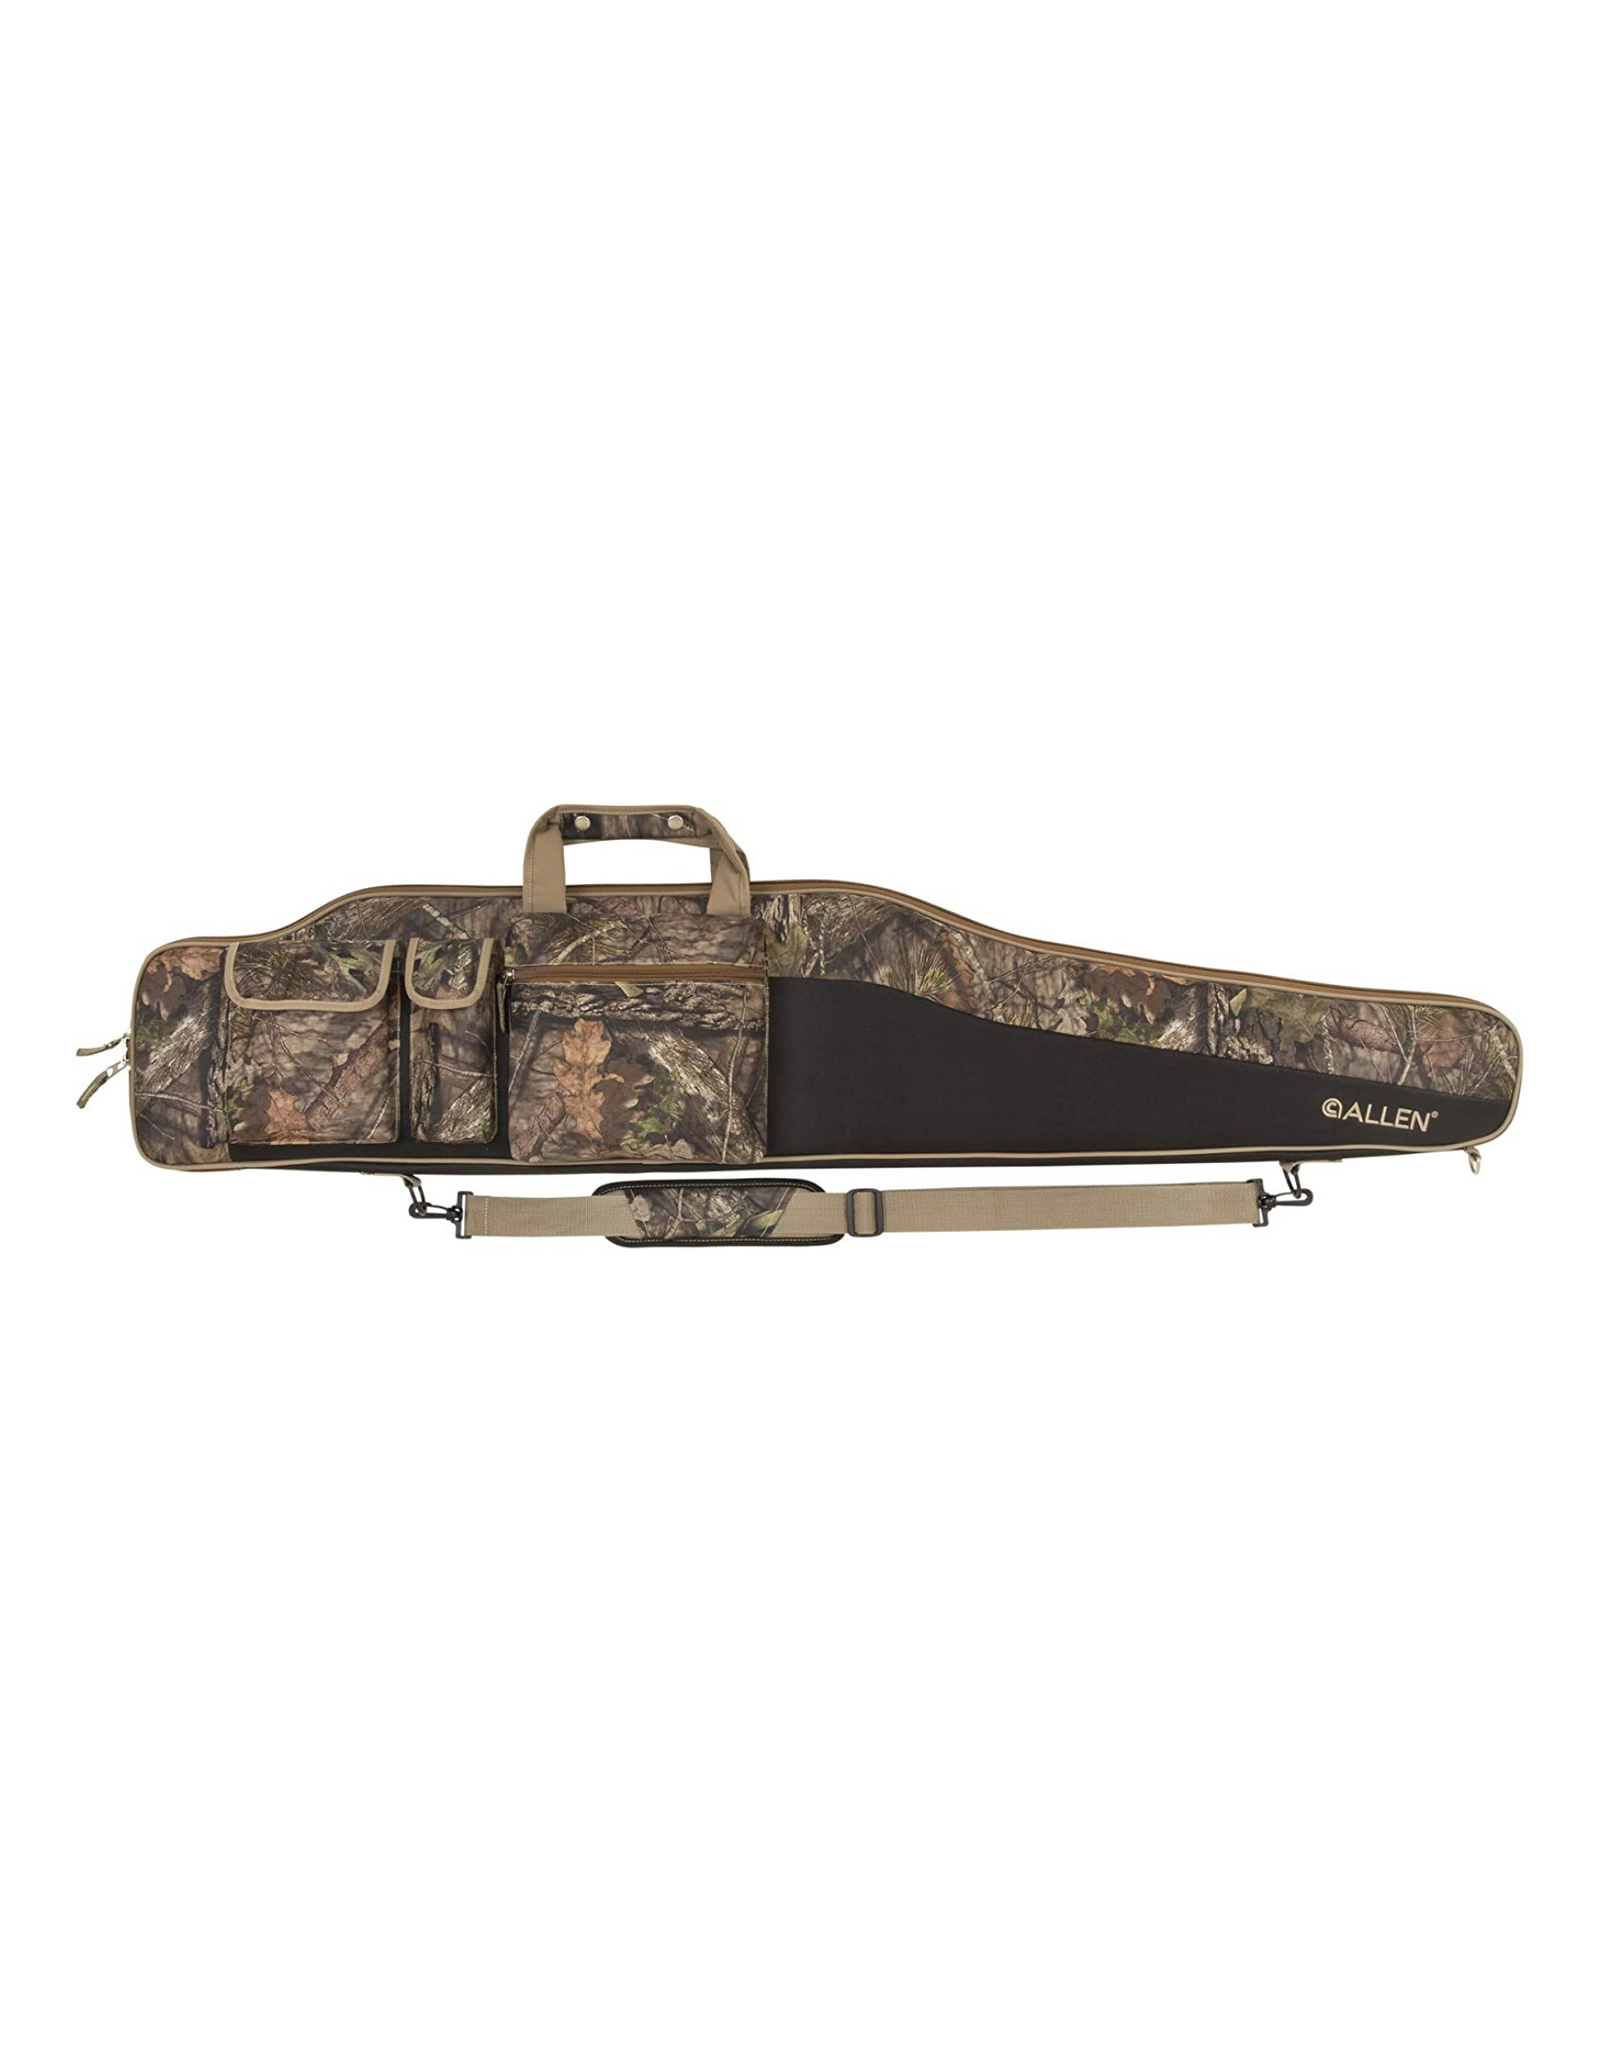 Allen Rifle Case, Mossy Oak Break-Up Country, Fits Rifles with Scopes up 50 Inch, Camo